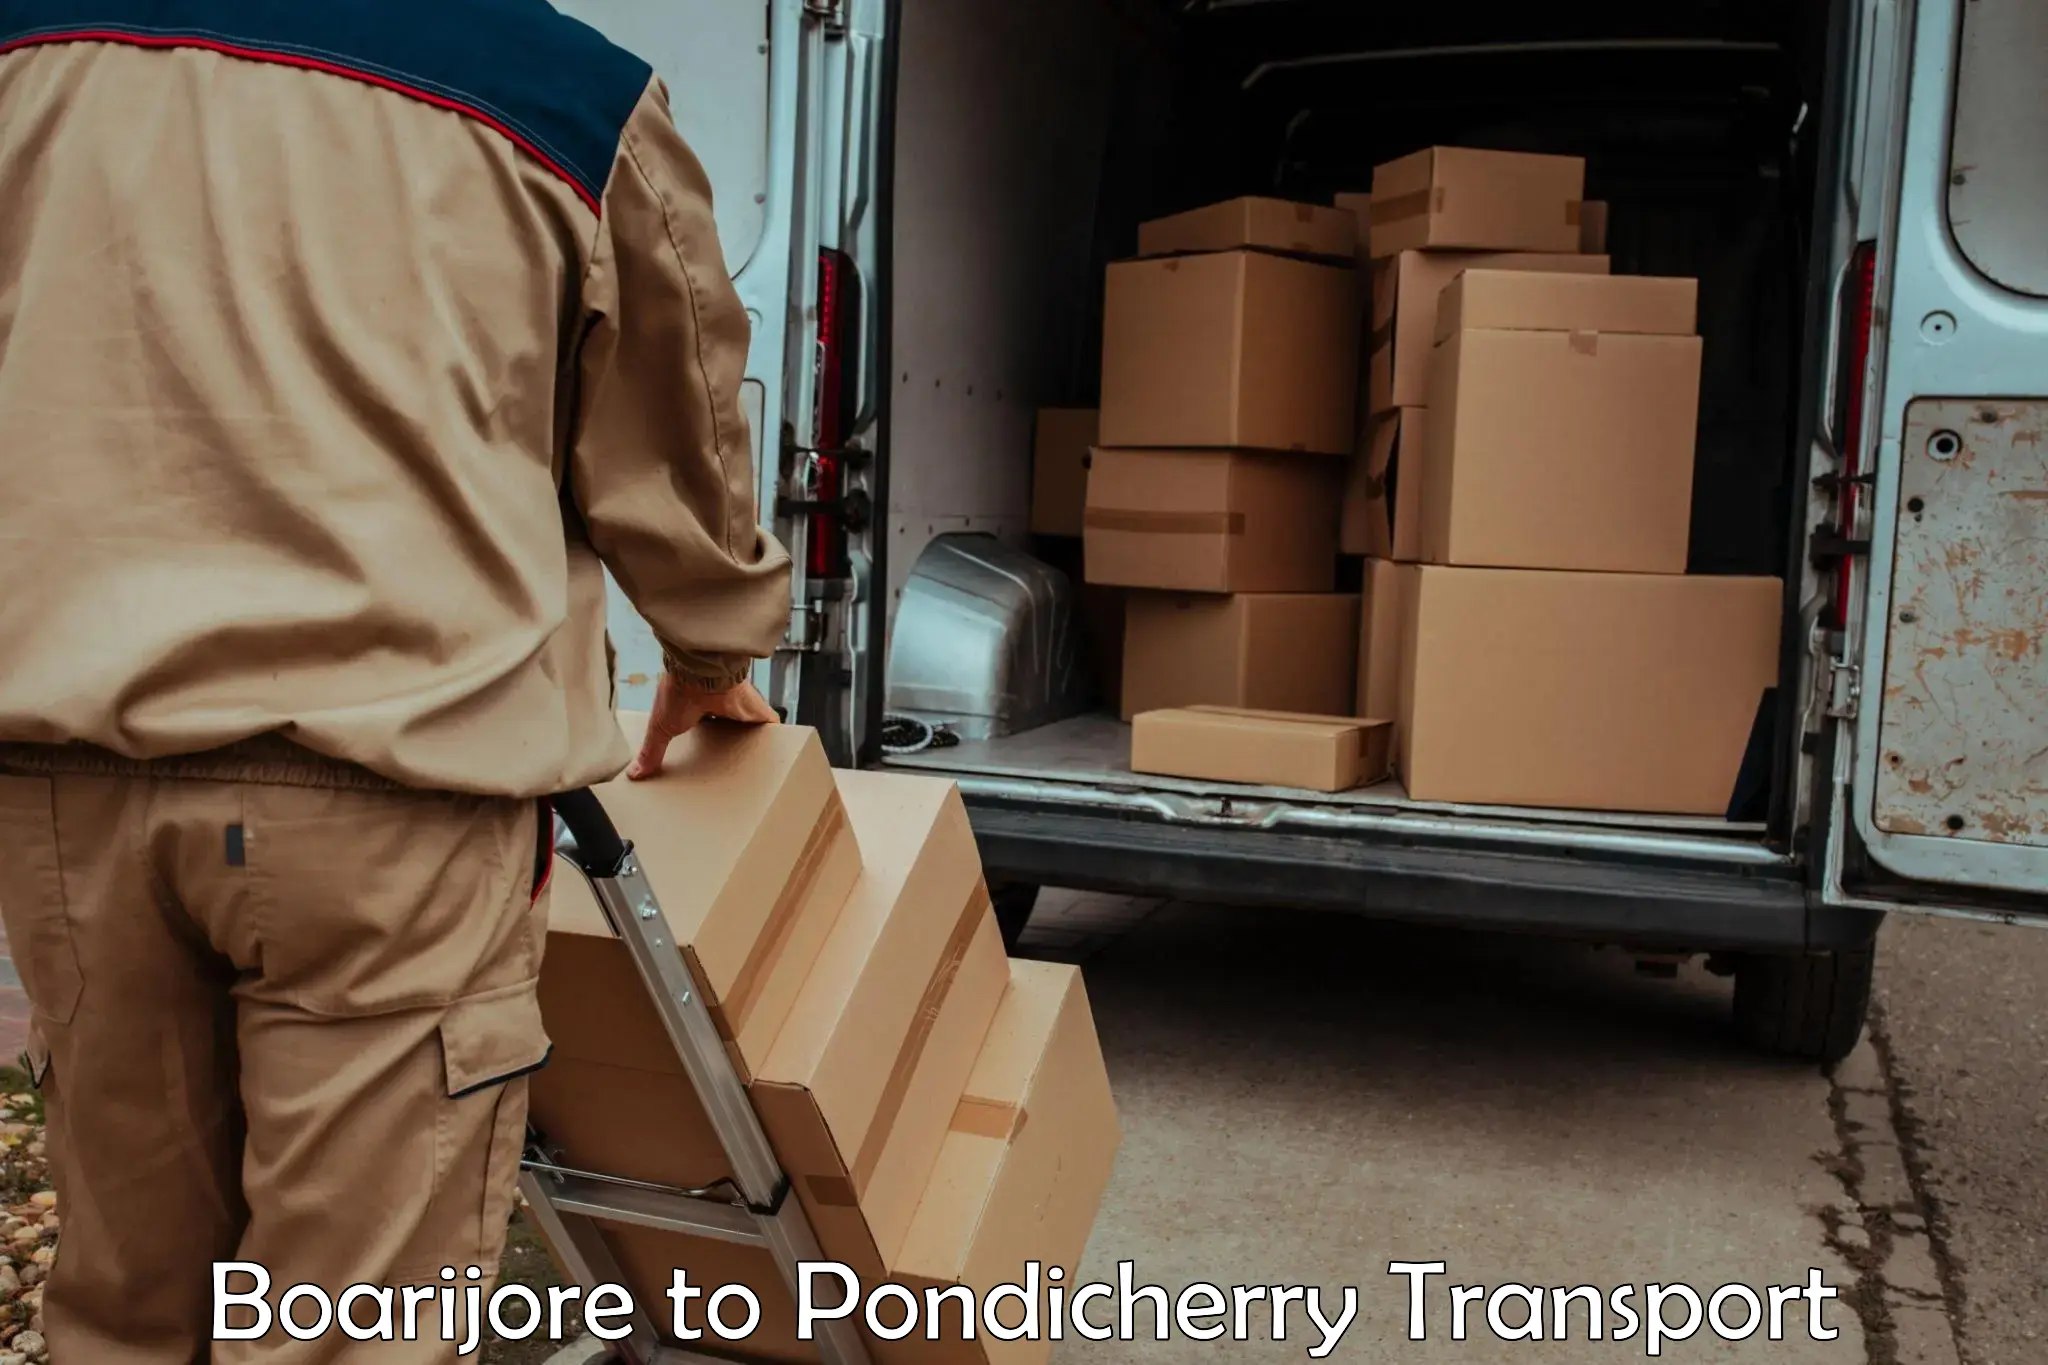 Part load transport service in India Boarijore to Pondicherry